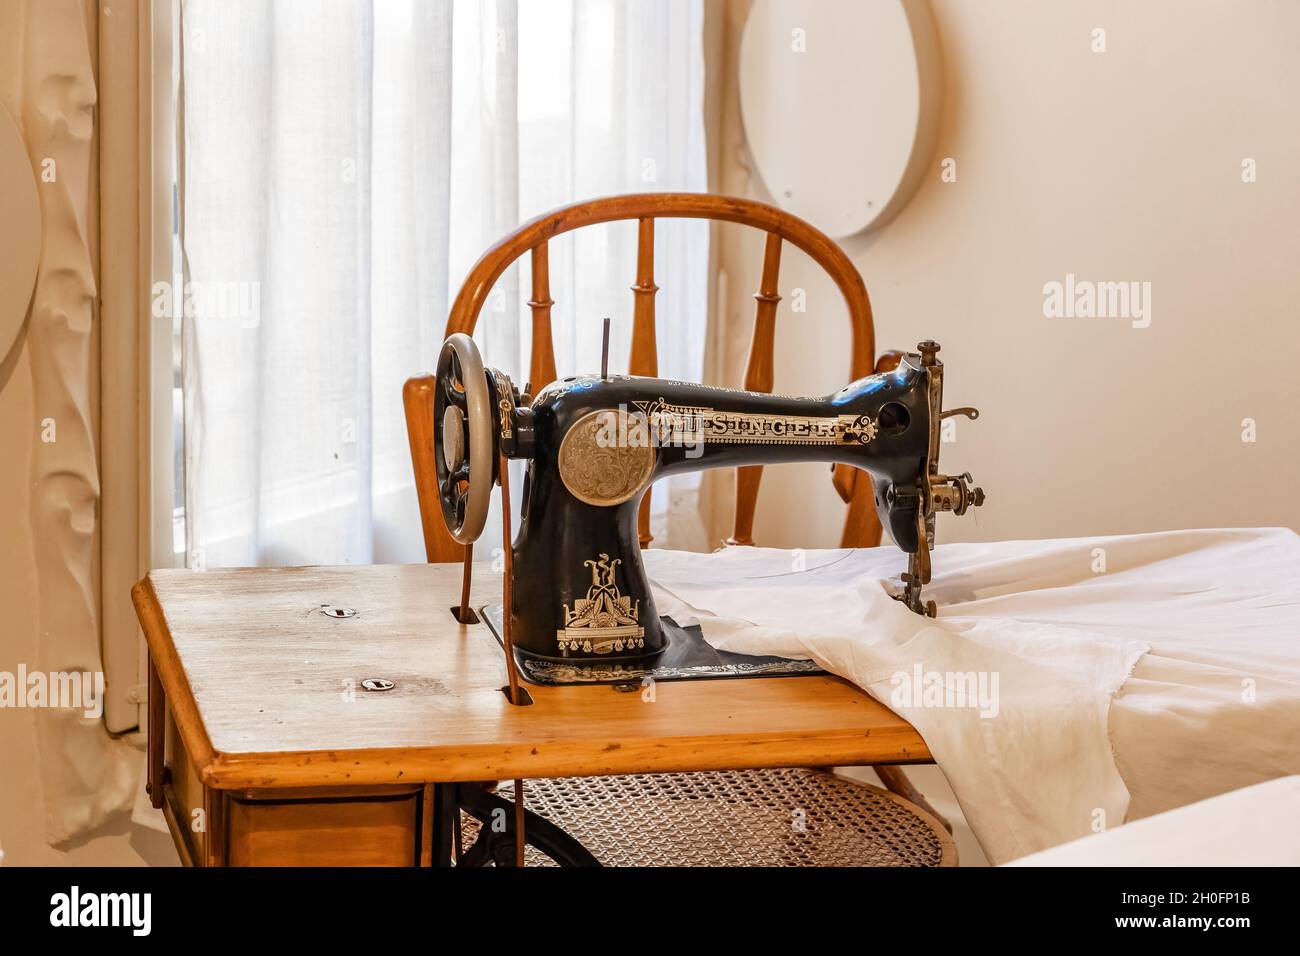 Barcelona, Spain - september 20, 2021: Old sewing machine, model New Family made by Singer. in 1890 sells 90% of the global sewing machine market and Stock Photo